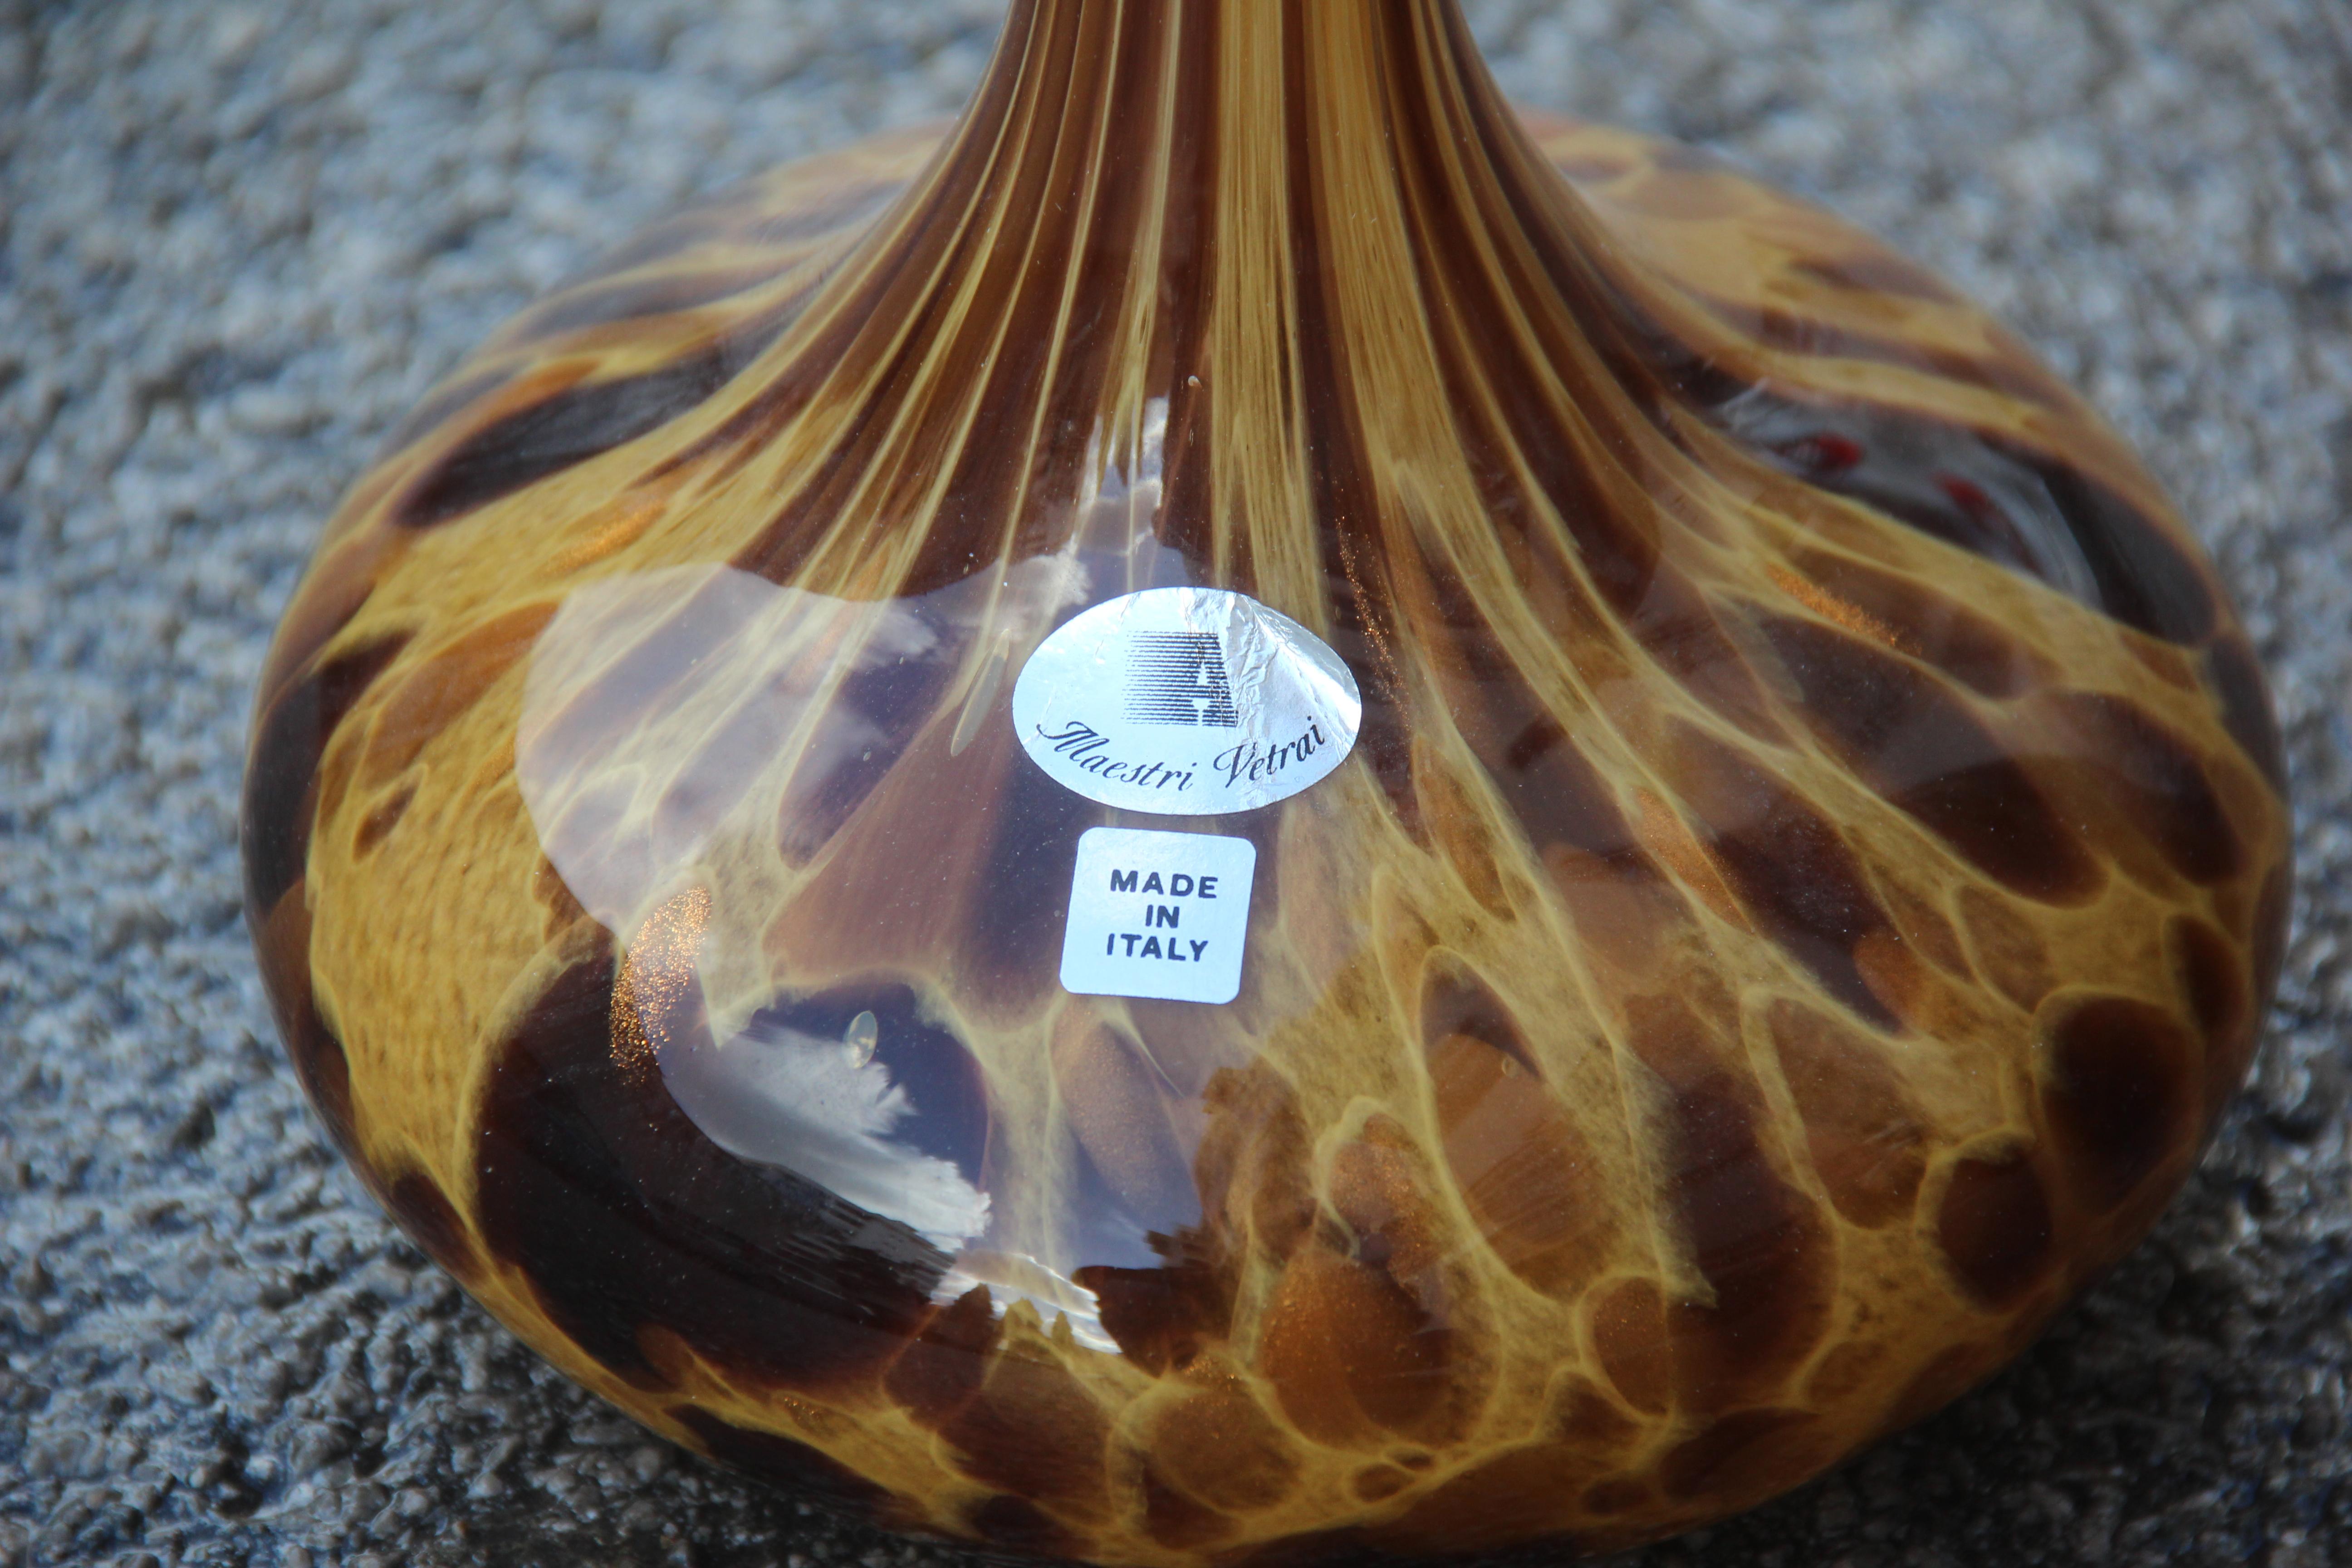 Large bottles in Murano glass spotted decoration Venturina, yellow color brawn.
Measures: Diameter small vase cm.12.